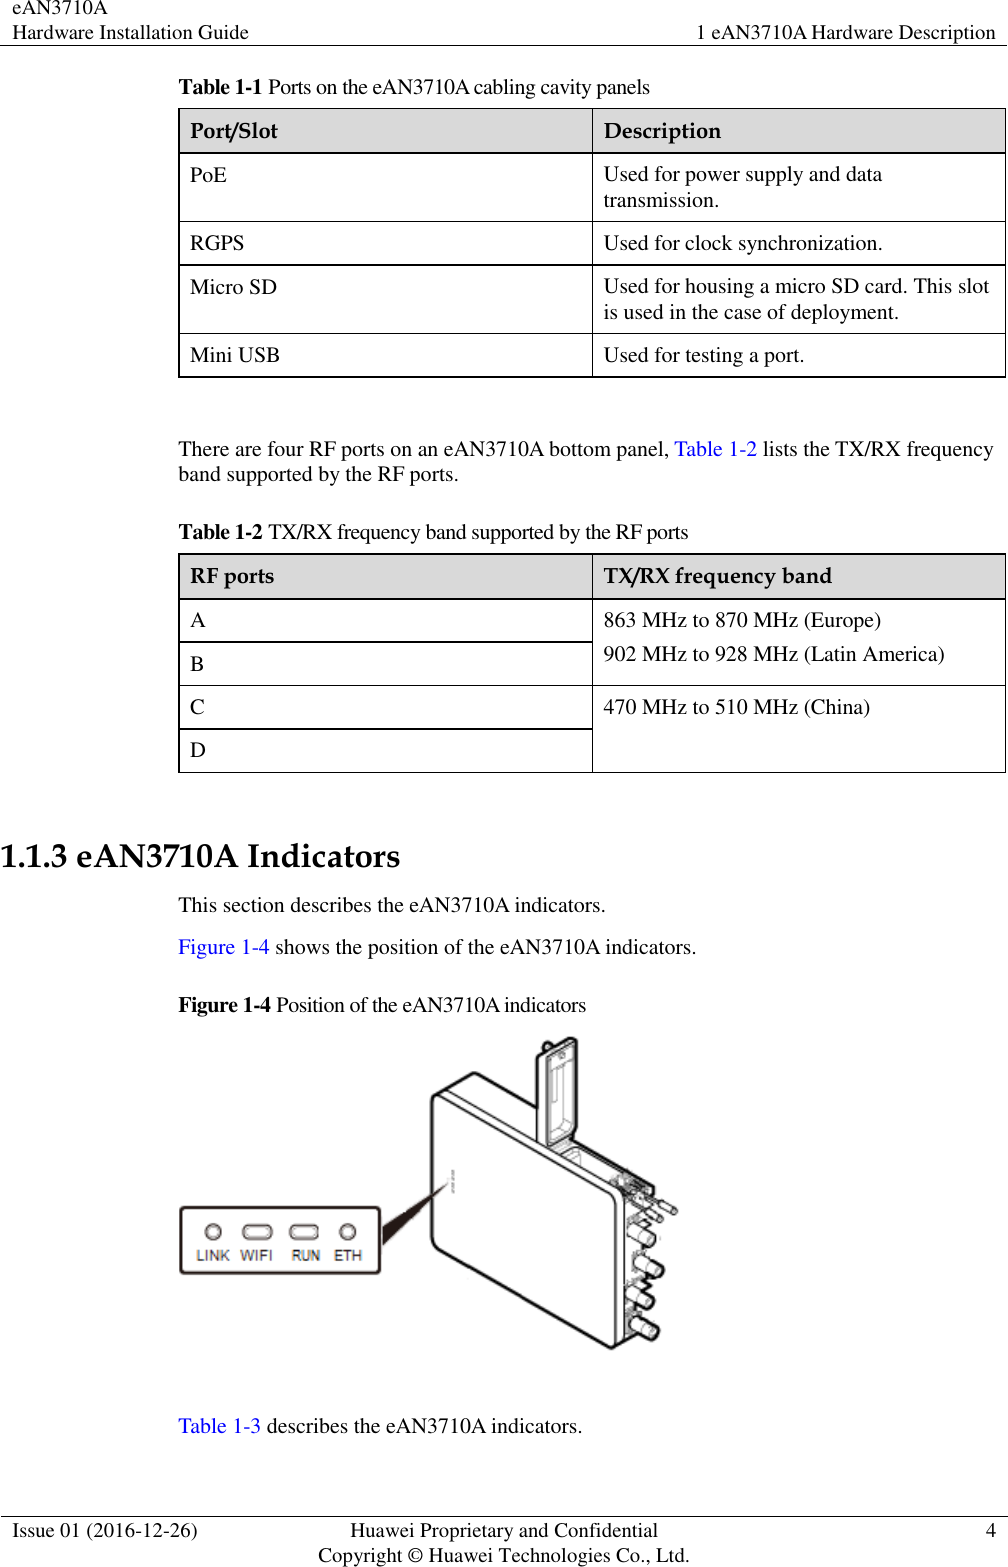 eAN3710A Hardware Installation Guide 1 eAN3710A Hardware Description  Issue 01 (2016-12-26) Huawei Proprietary and Confidential                                     Copyright © Huawei Technologies Co., Ltd. 4  Table 1-1 Ports on the eAN3710A cabling cavity panels Port/Slot Description PoE Used for power supply and data transmission. RGPS Used for clock synchronization. Micro SD Used for housing a micro SD card. This slot is used in the case of deployment. Mini USB Used for testing a port.  There are four RF ports on an eAN3710A bottom panel, Table 1-2 lists the TX/RX frequency band supported by the RF ports. Table 1-2 TX/RX frequency band supported by the RF ports RF ports TX/RX frequency band A 863 MHz to 870 MHz (Europe) 902 MHz to 928 MHz (Latin America) B C 470 MHz to 510 MHz (China) D  1.1.3 eAN3710A Indicators This section describes the eAN3710A indicators.   Figure 1-4 shows the position of the eAN3710A indicators. Figure 1-4 Position of the eAN3710A indicators   Table 1-3 describes the eAN3710A indicators. 